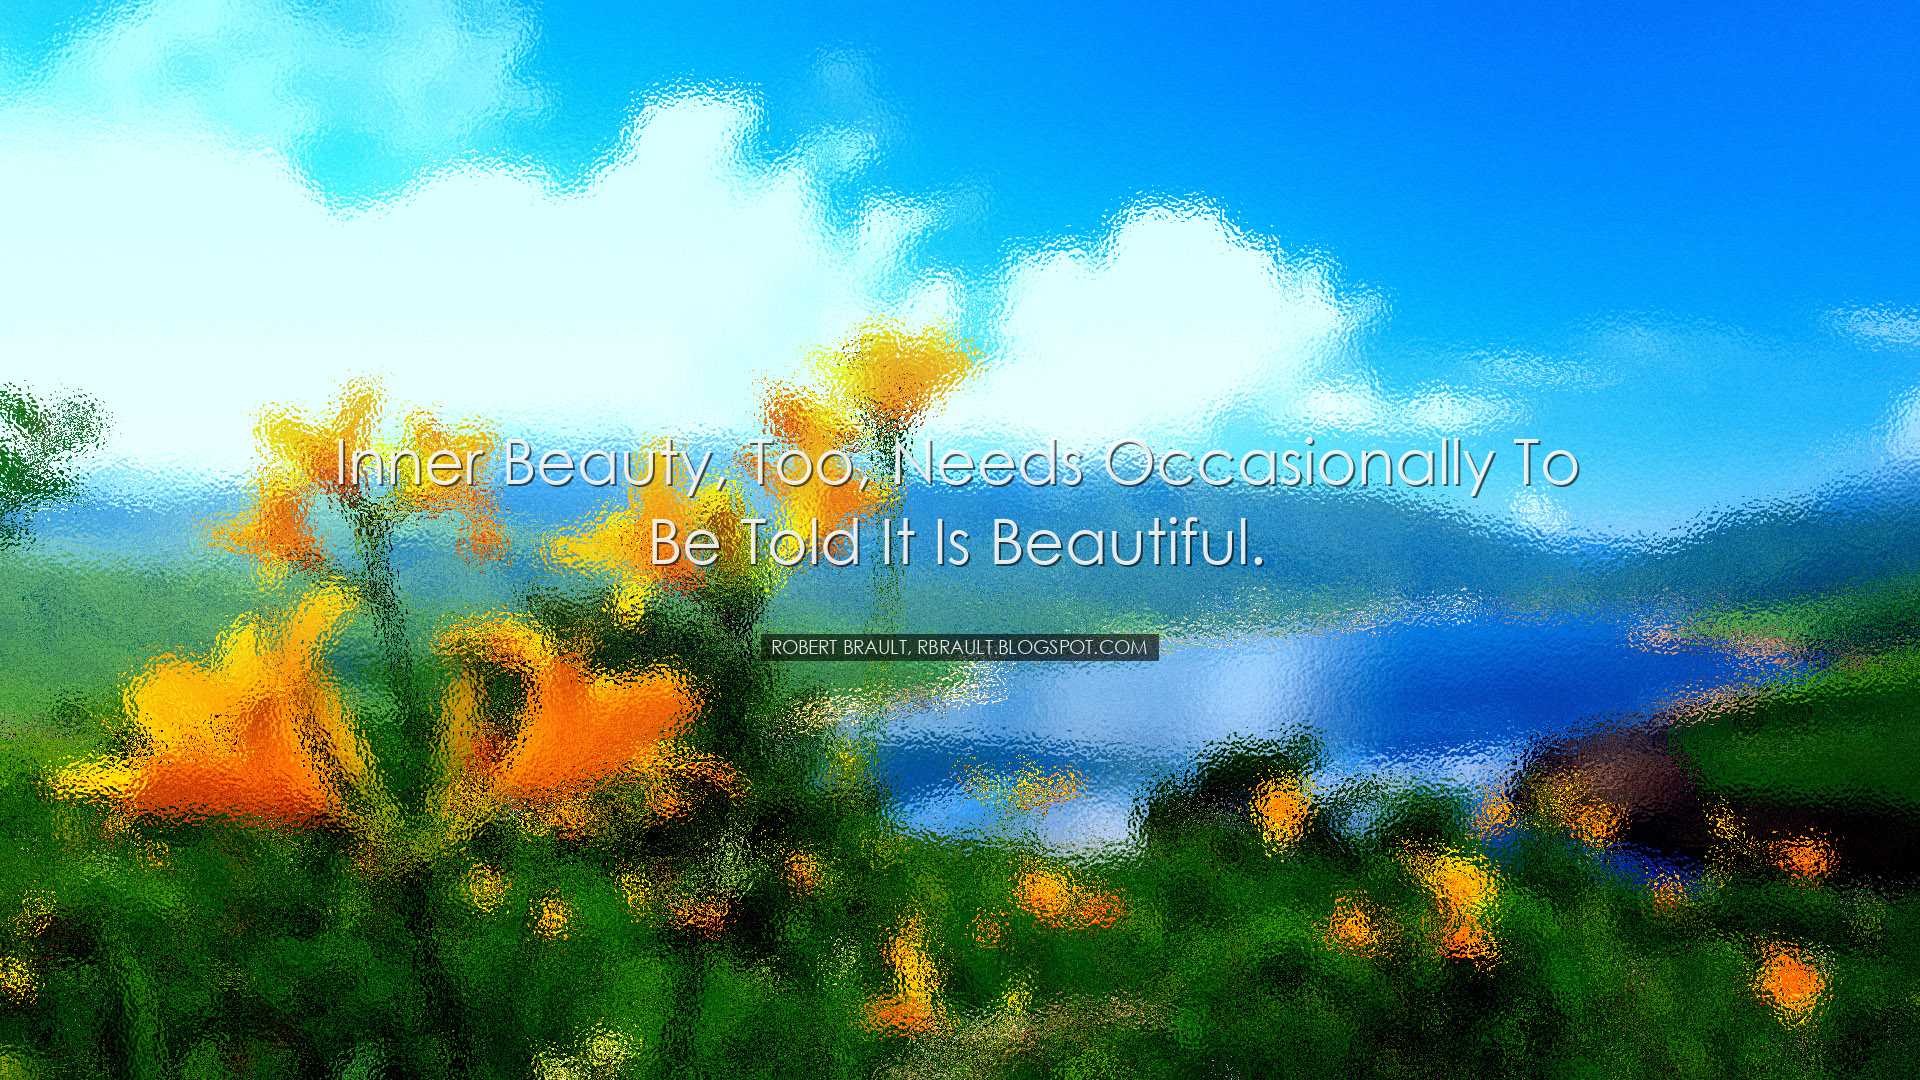 Inner beauty, too, needs occasionally to be told it is beautiful.